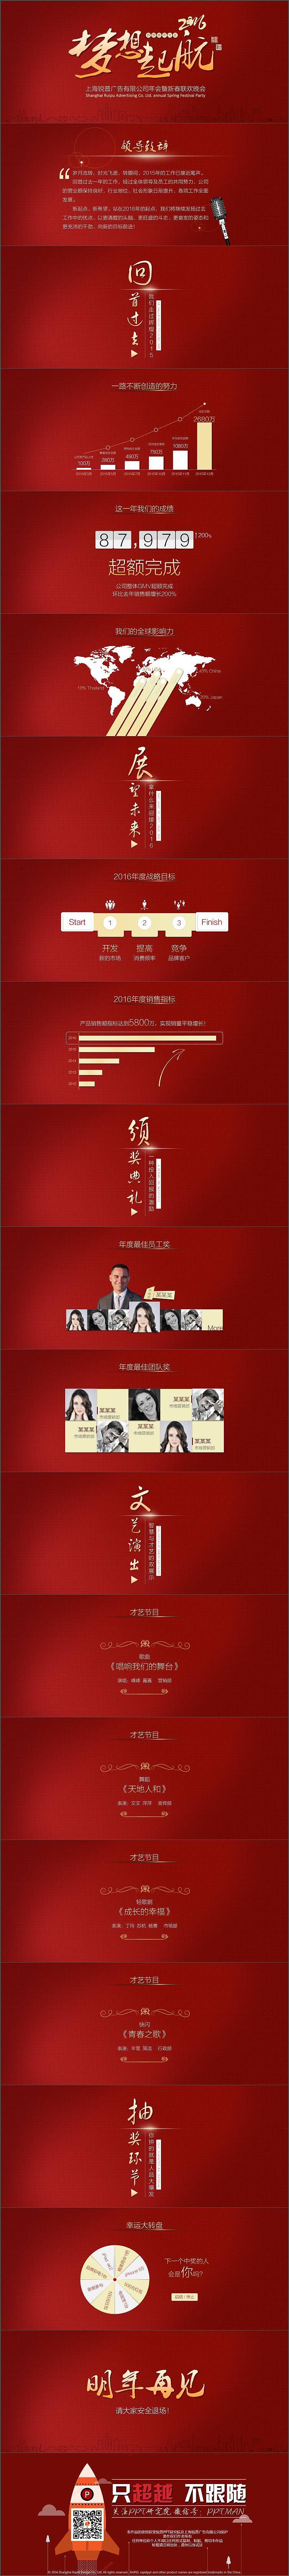 [Set Sail] Ultra Wide Ratio Corporate Annual Meeting and Spring Festival Gala PPT Template